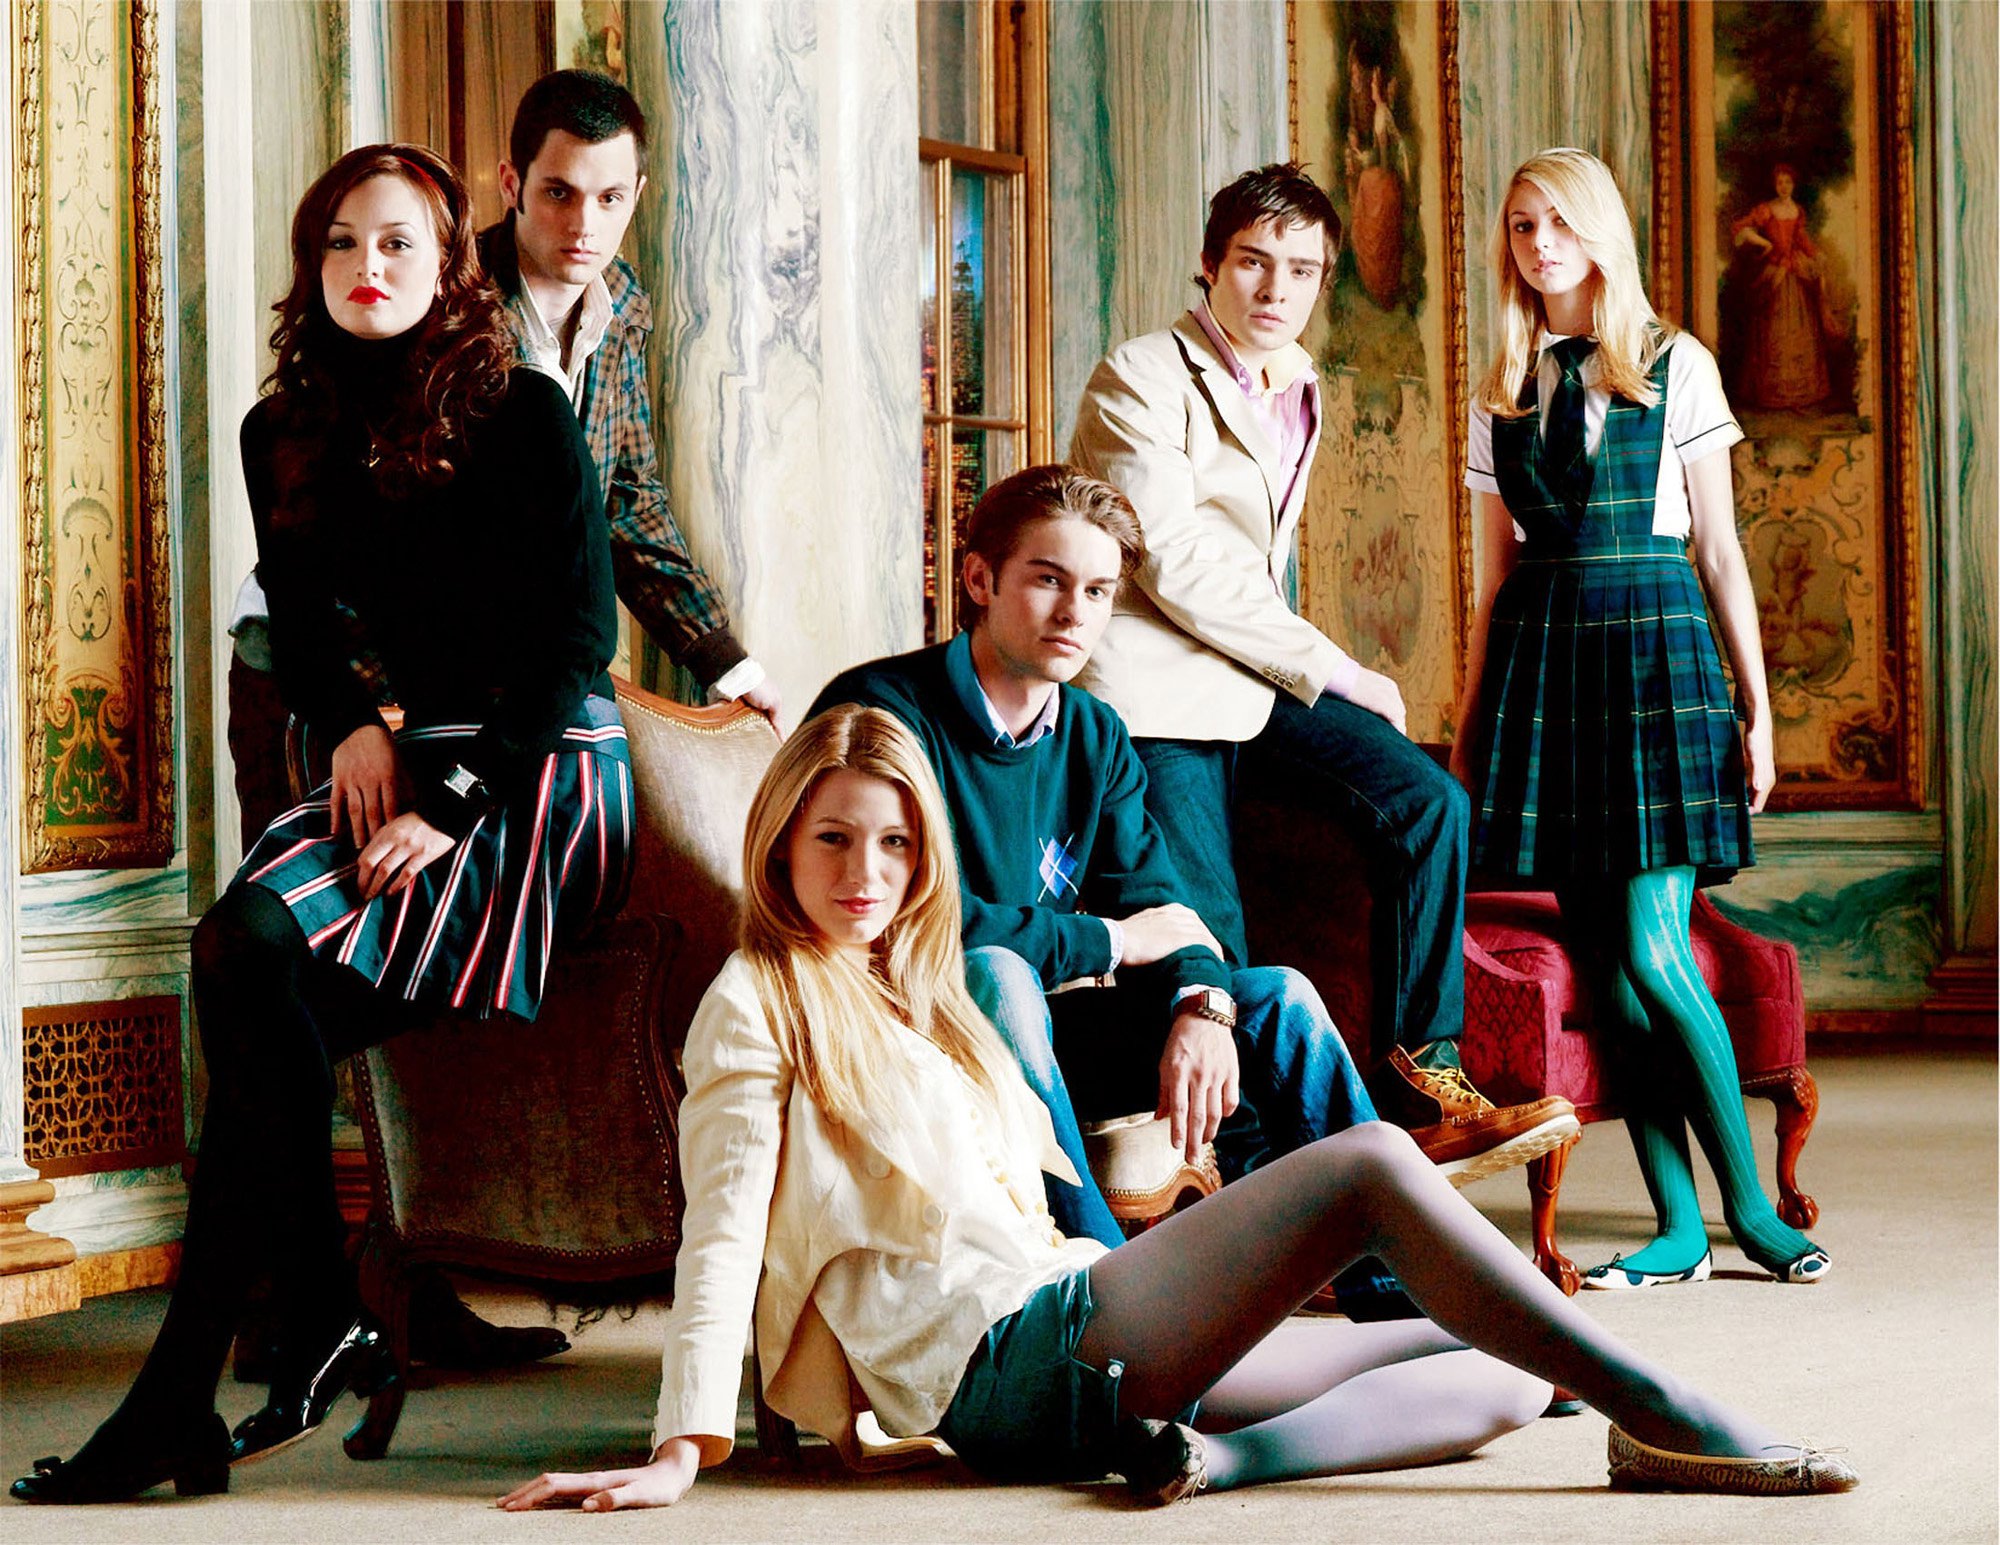 Gossip Girl cast, Penn Badgley, Ed Westwick, Taylor Momsen, Leighton Meester, Chace Crawford, Blake Lively